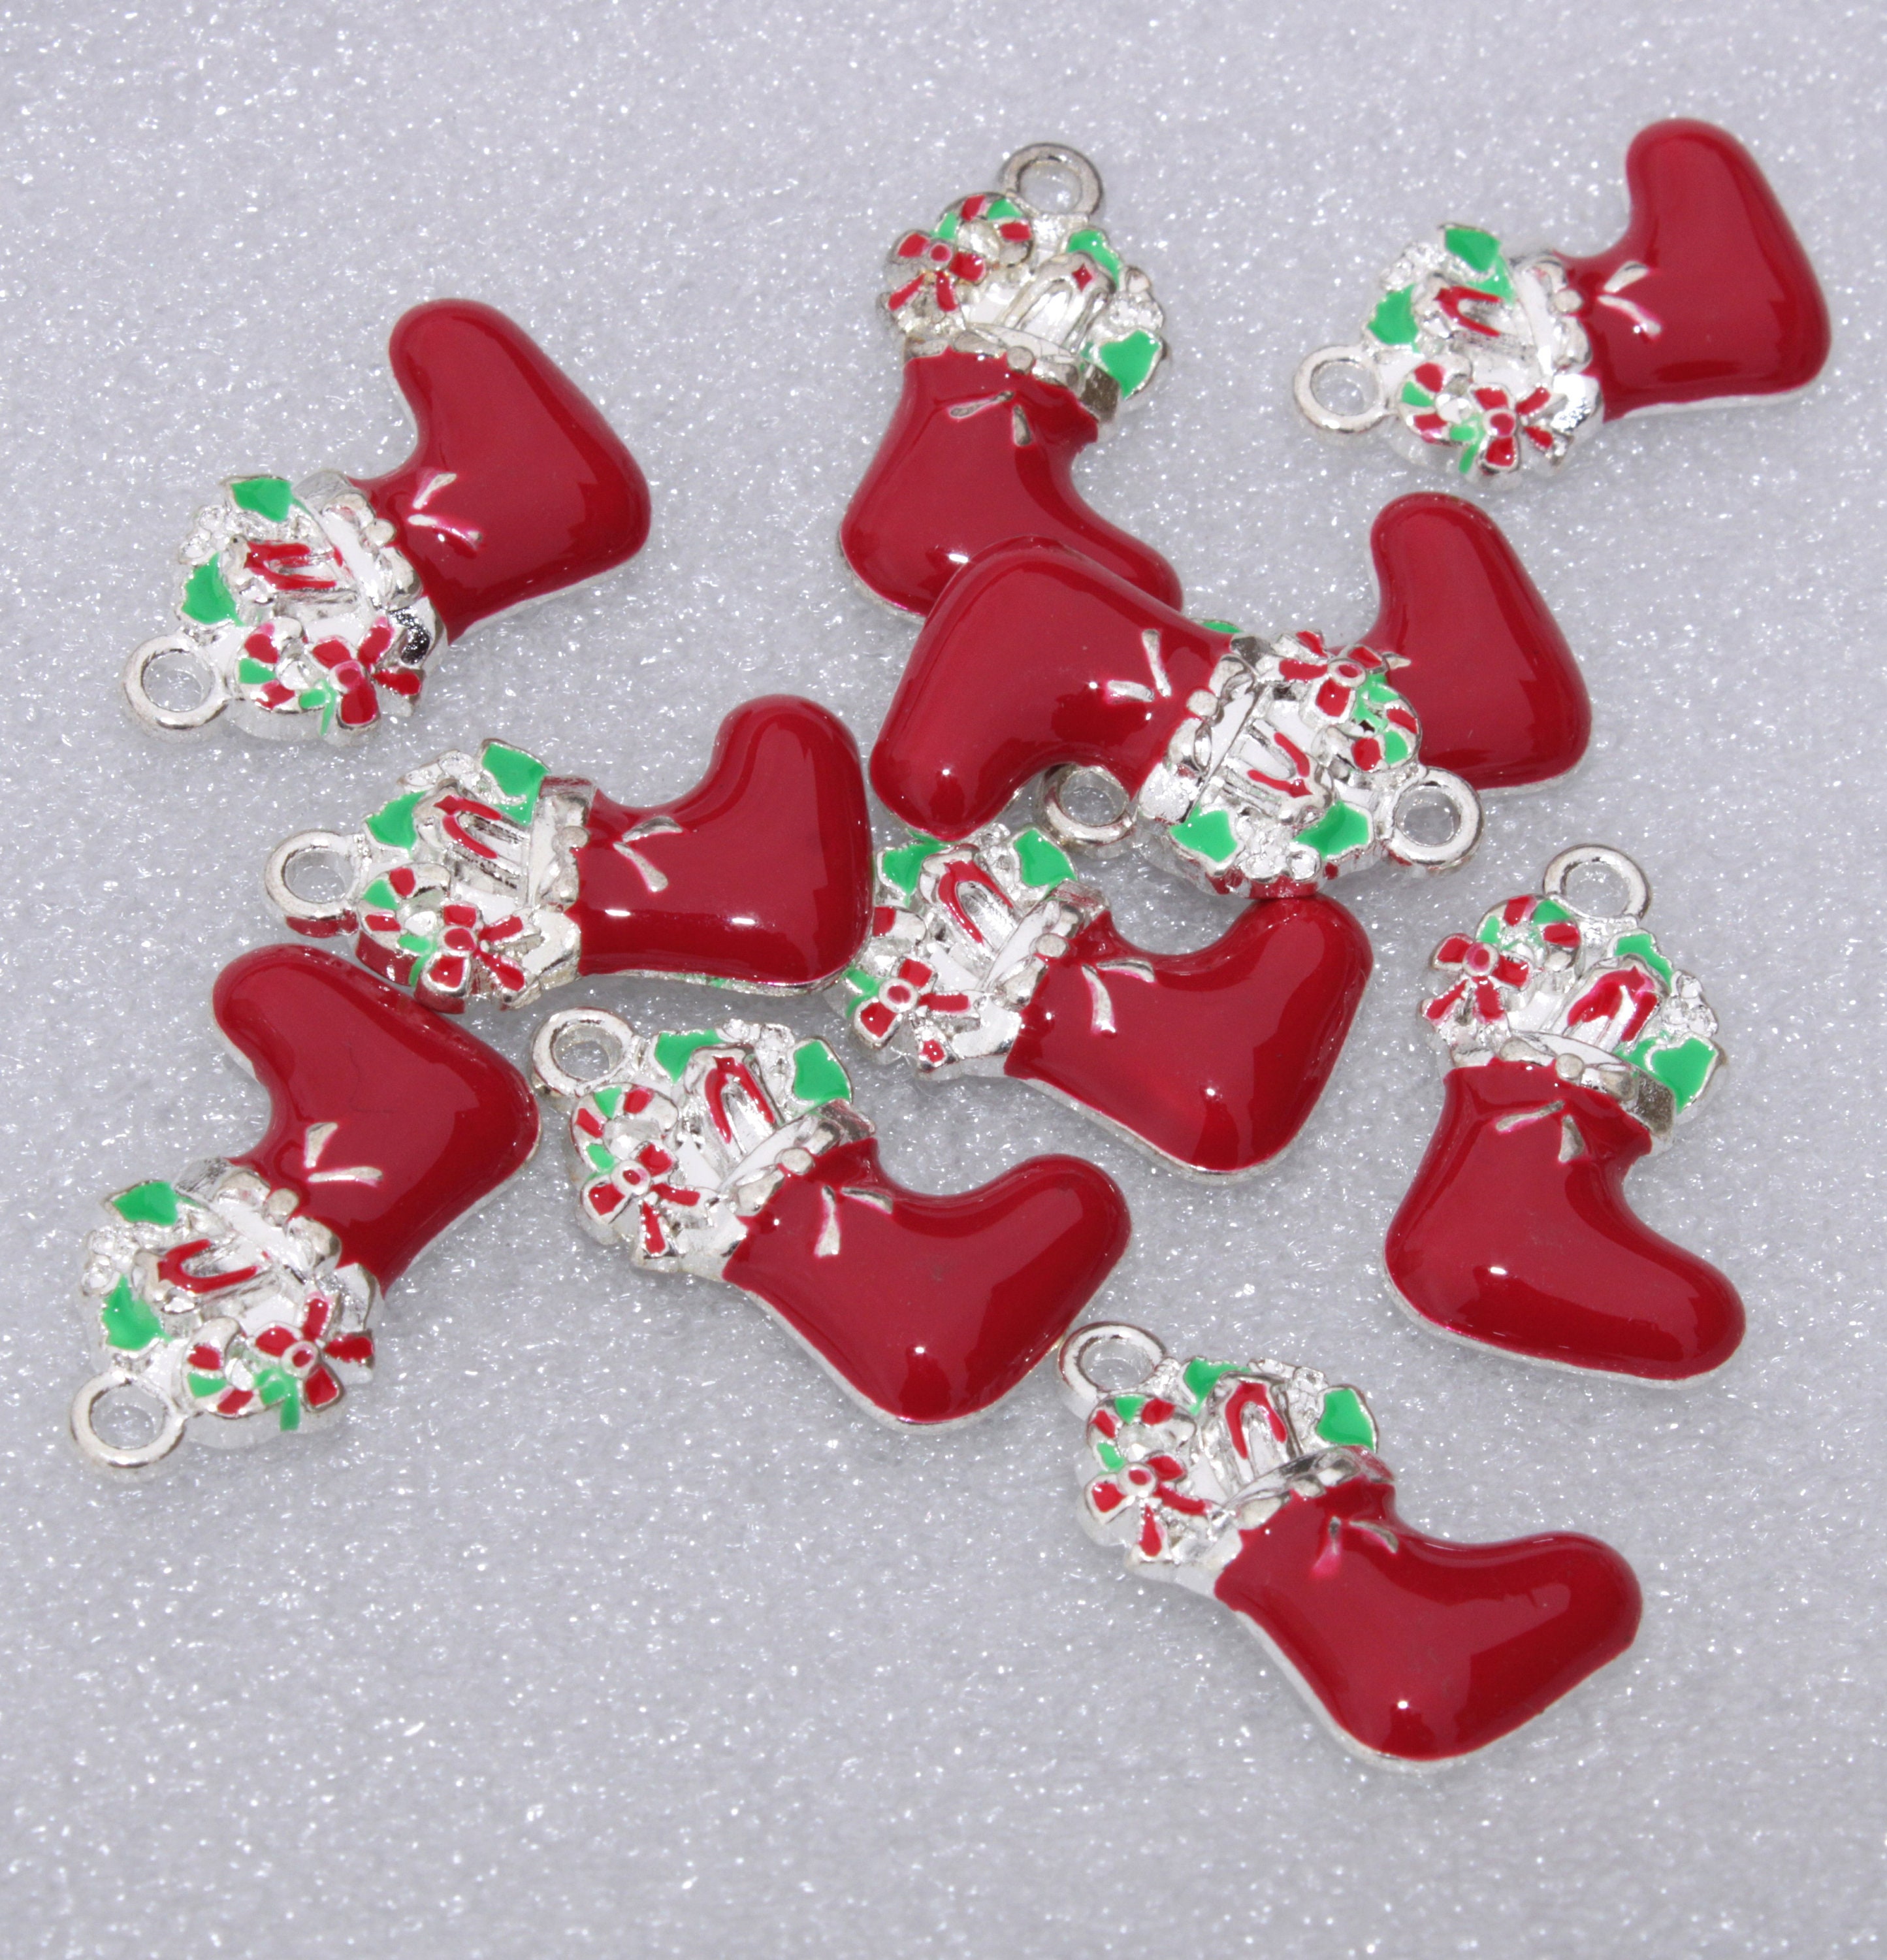 Christmas Charms for Jewelry Making Red Green Bow Charm Pendants for DIY Earring Bracelet Necklaces Holiday Clothes Sewing by Fablise Craft